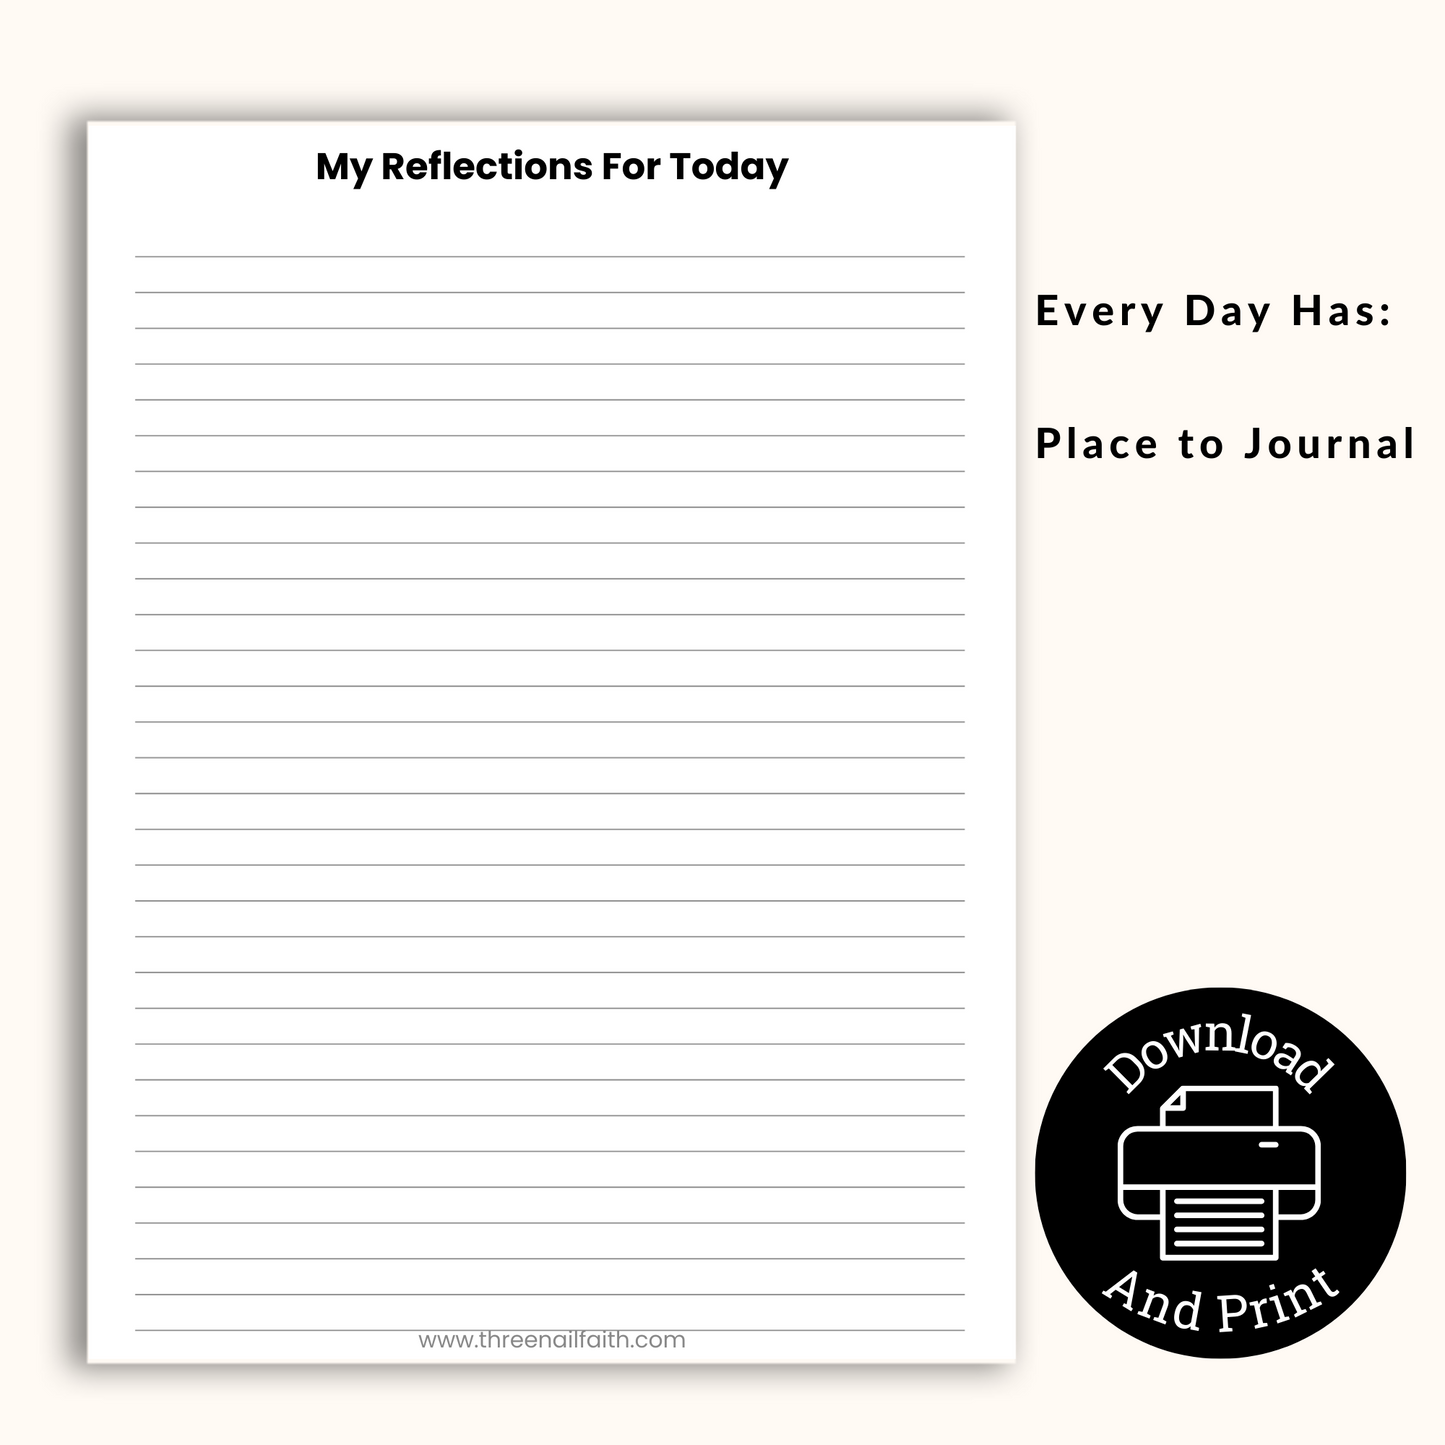 daily reflections page has lines for you to write your reflections each day